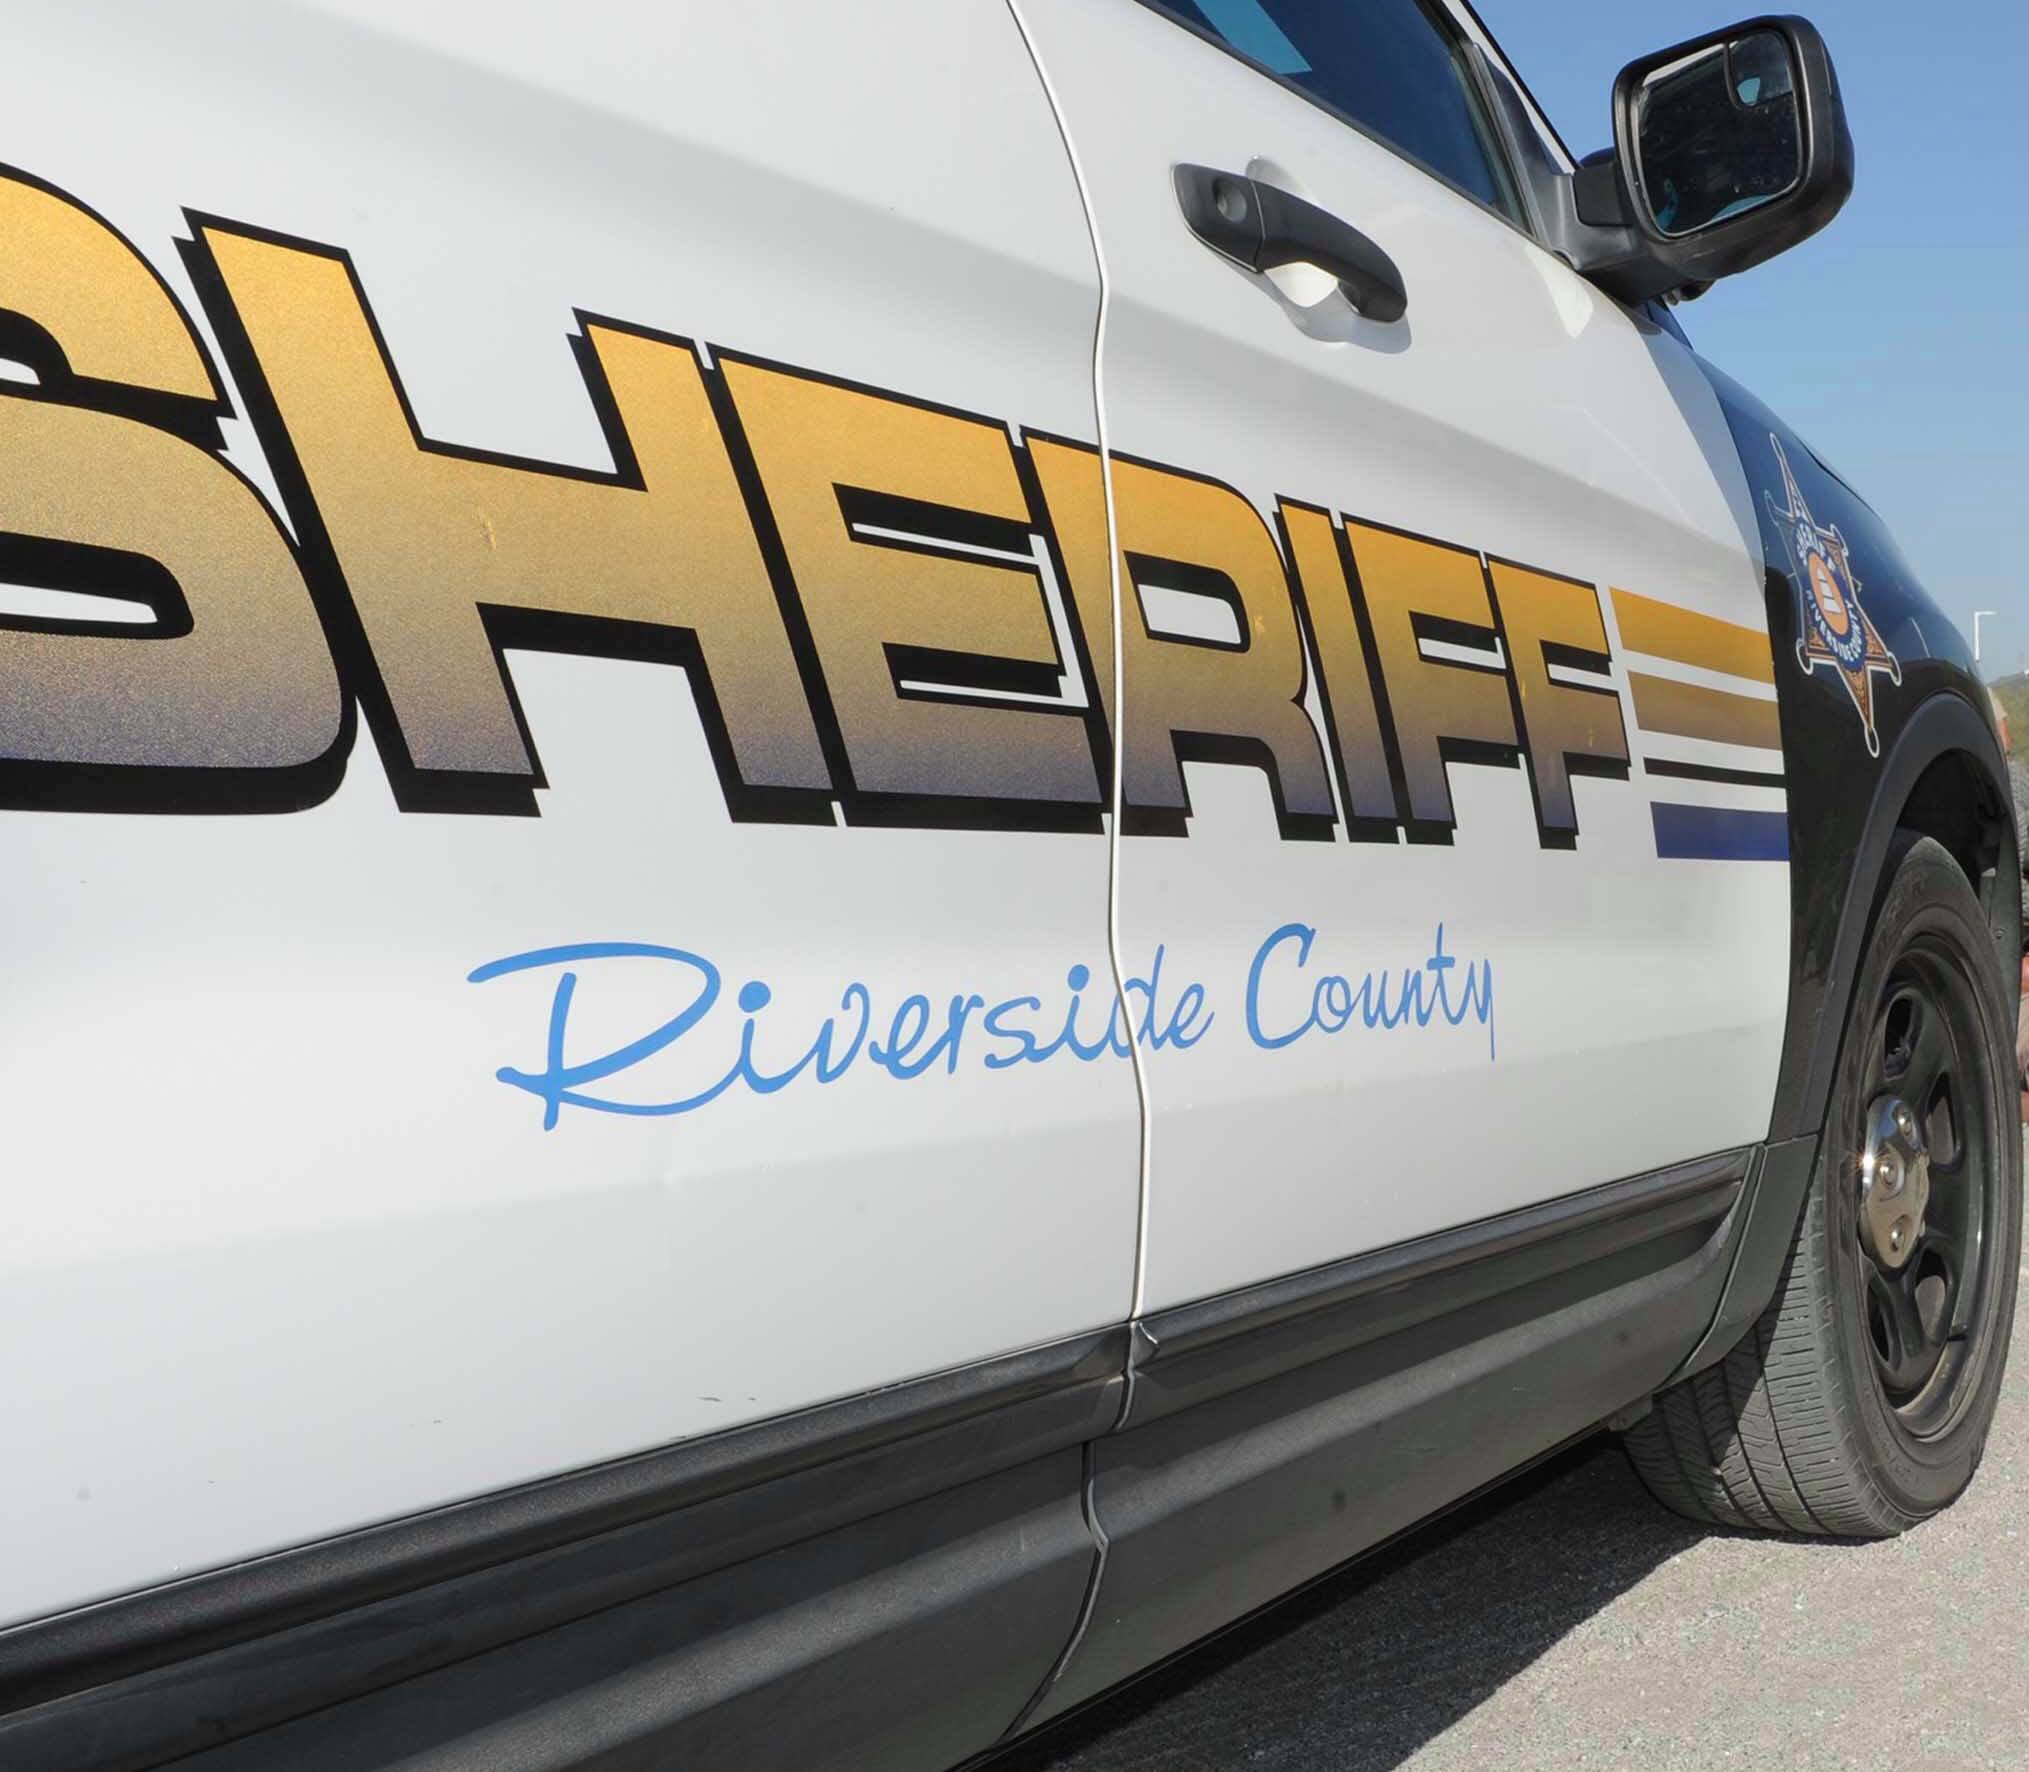 A Riverside County Sheriff's Department vehicle is seen in an undated file photo shared by the agency.